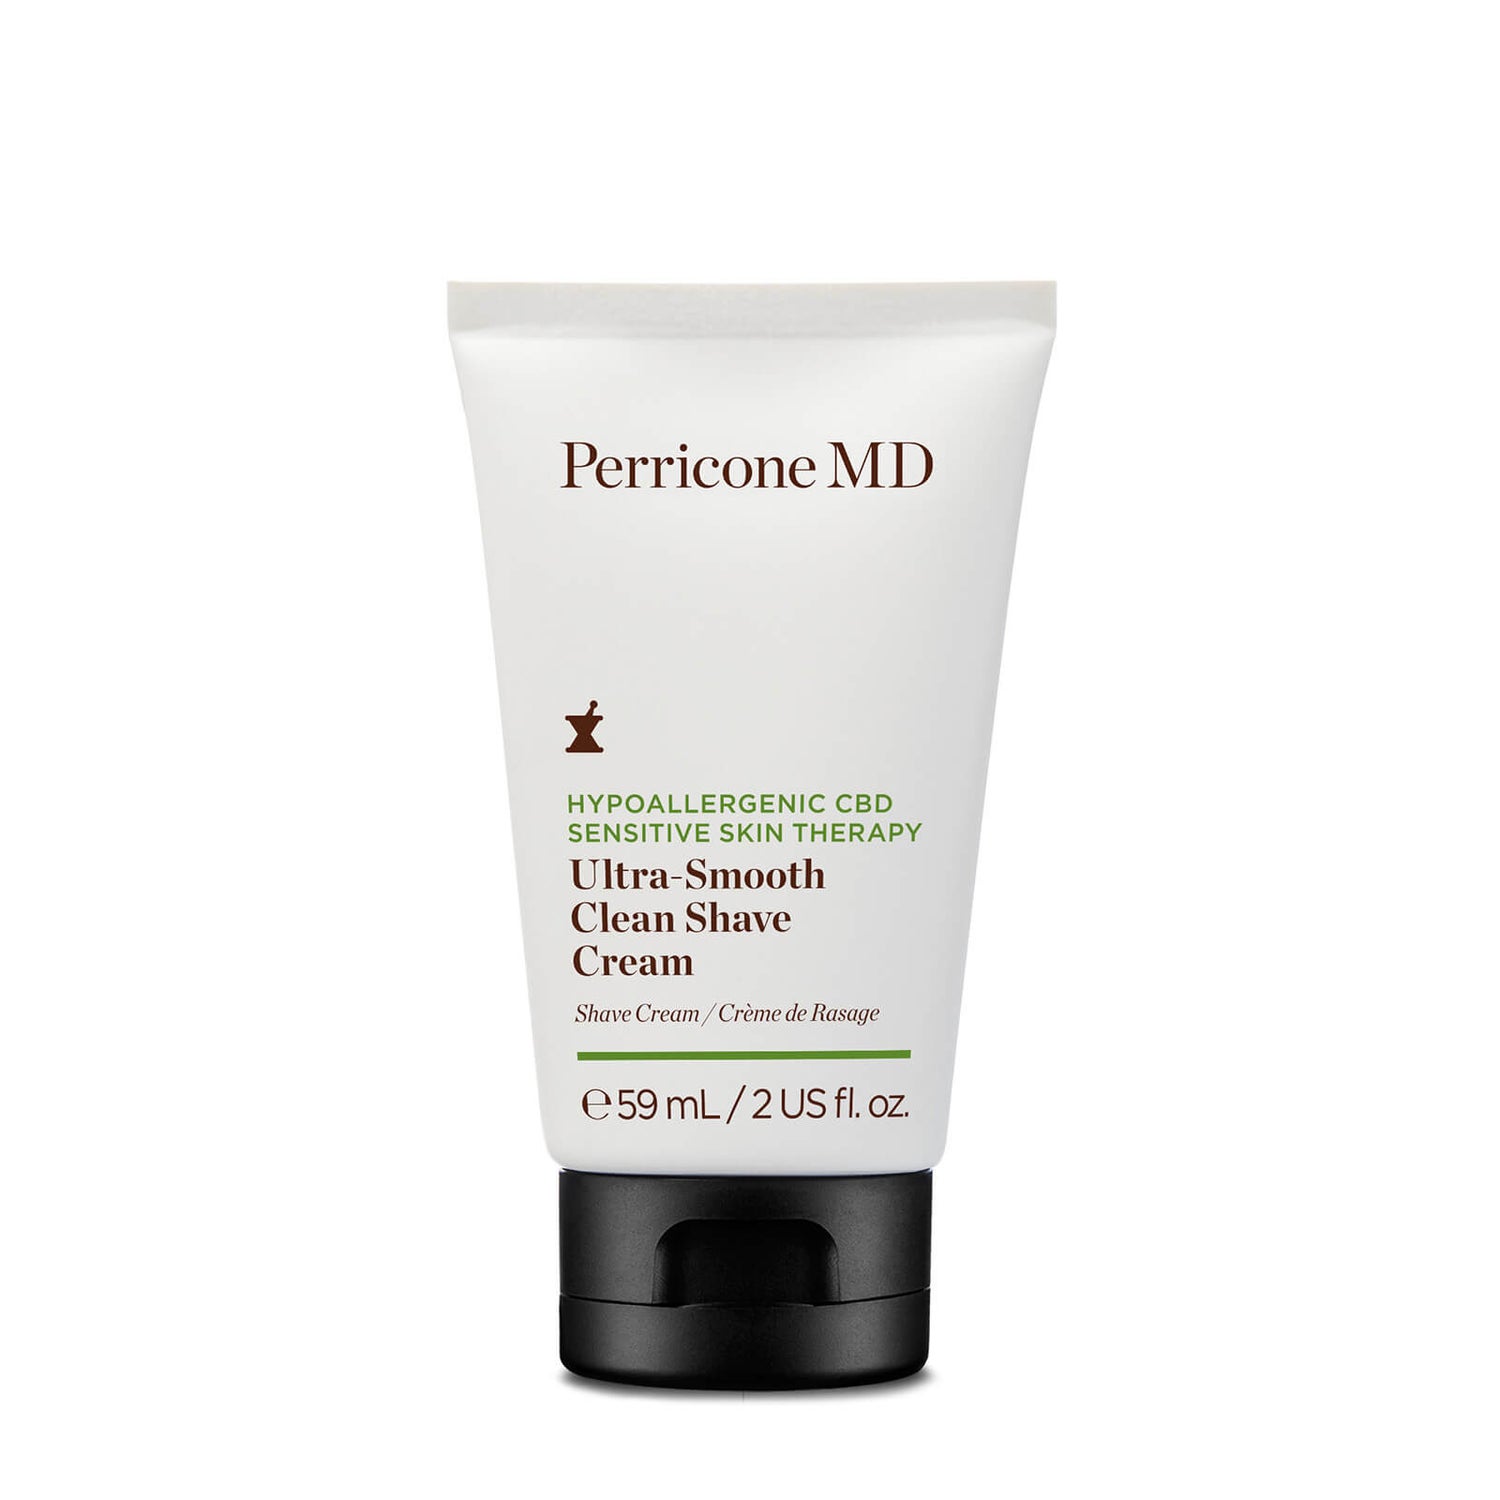 Perricone MD CBD Hypoallergenic Sensitive Skin Therapy Ultra-Smooth Clean Shave Cream 177ml